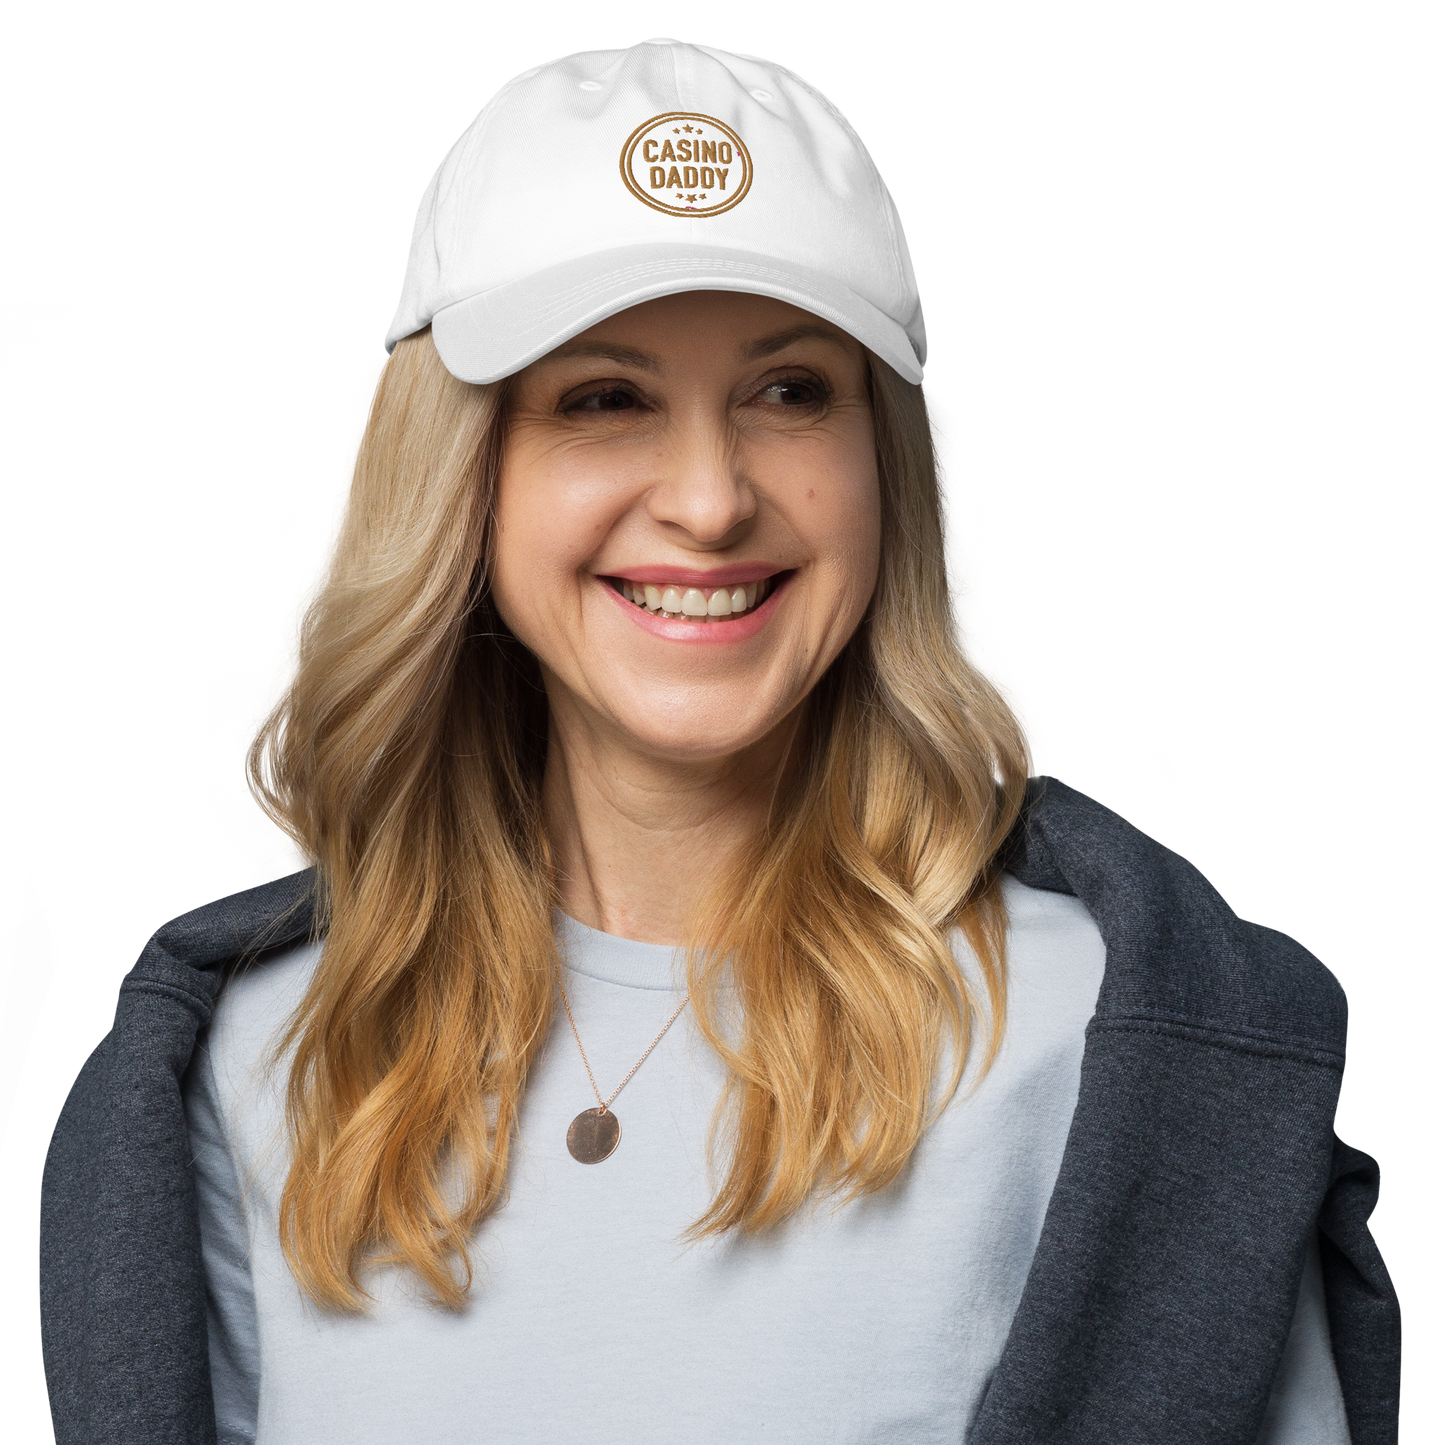 CODE CasinoDaddy Gold Cap Free with Code